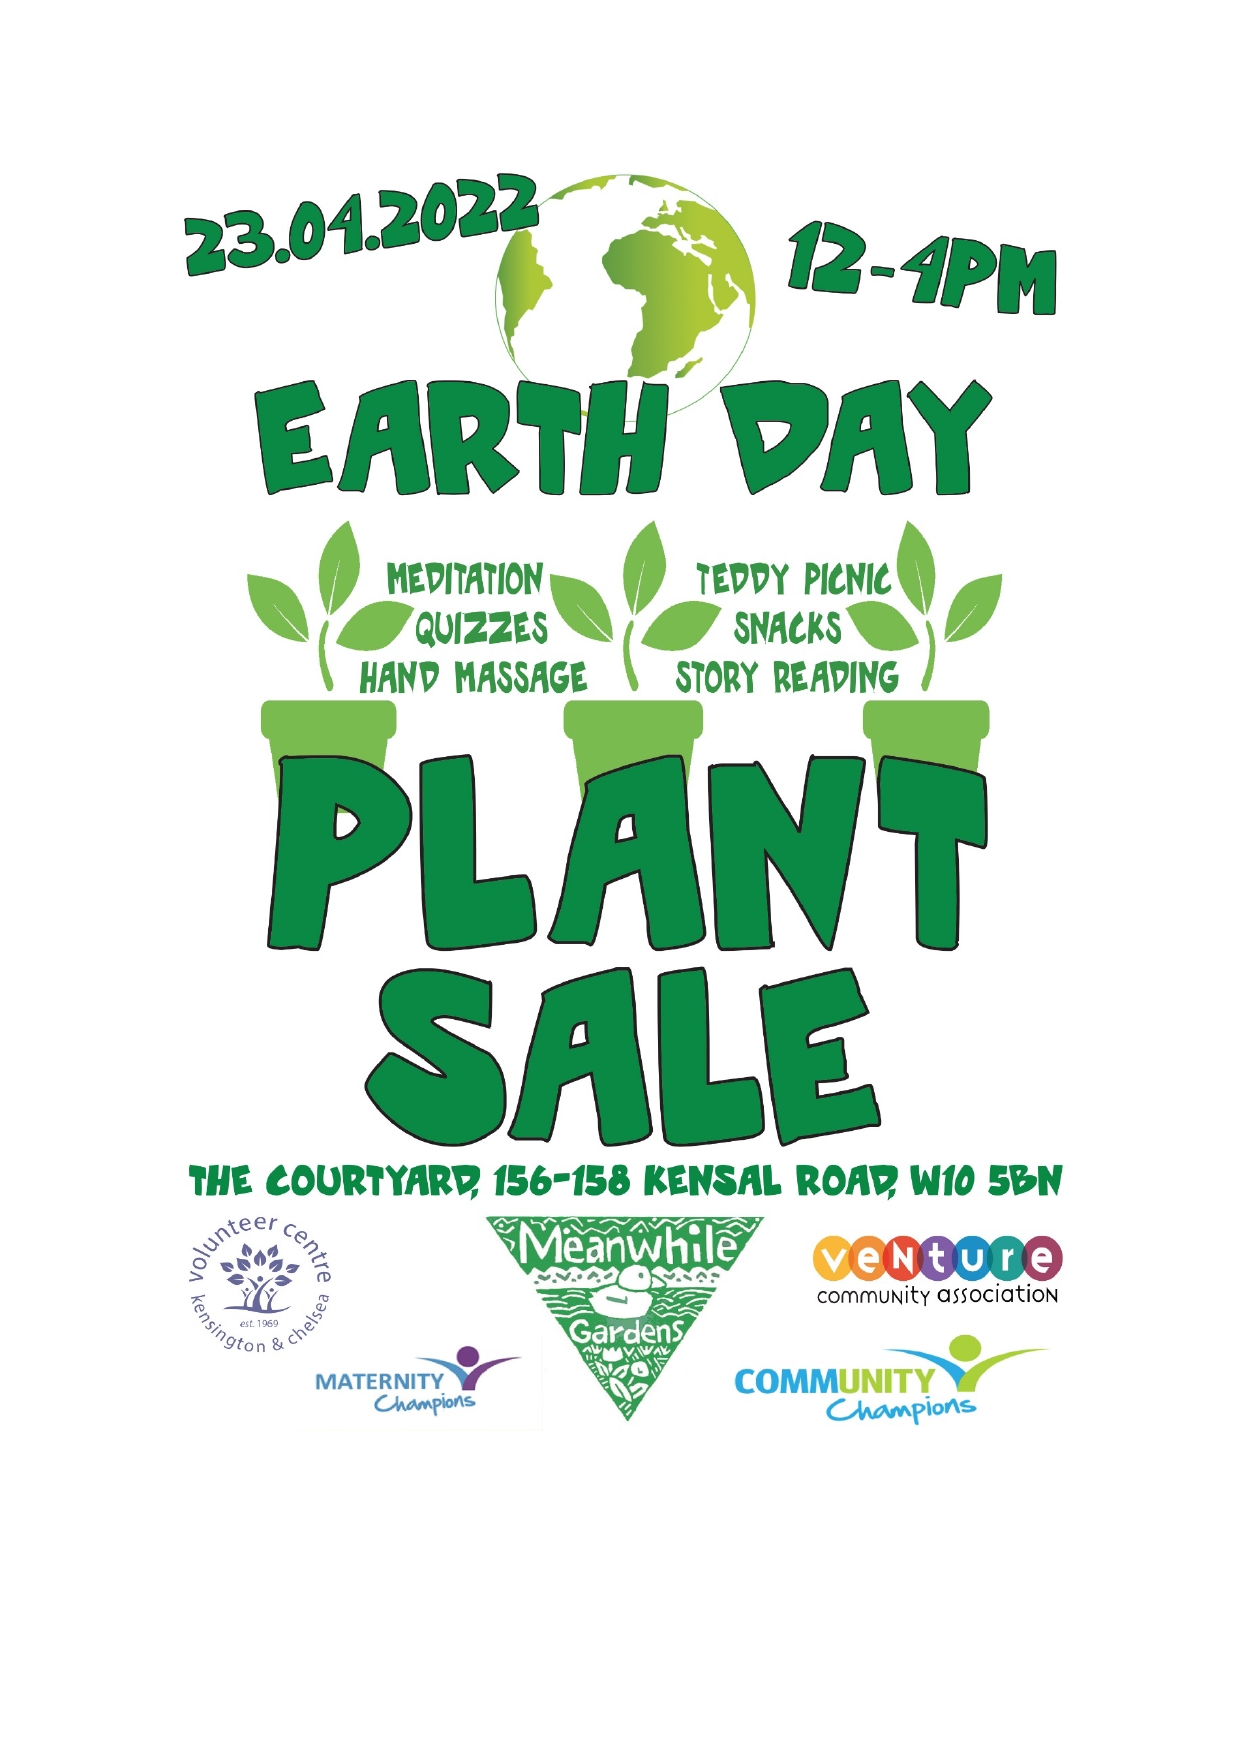 Earth Day Celebration Event